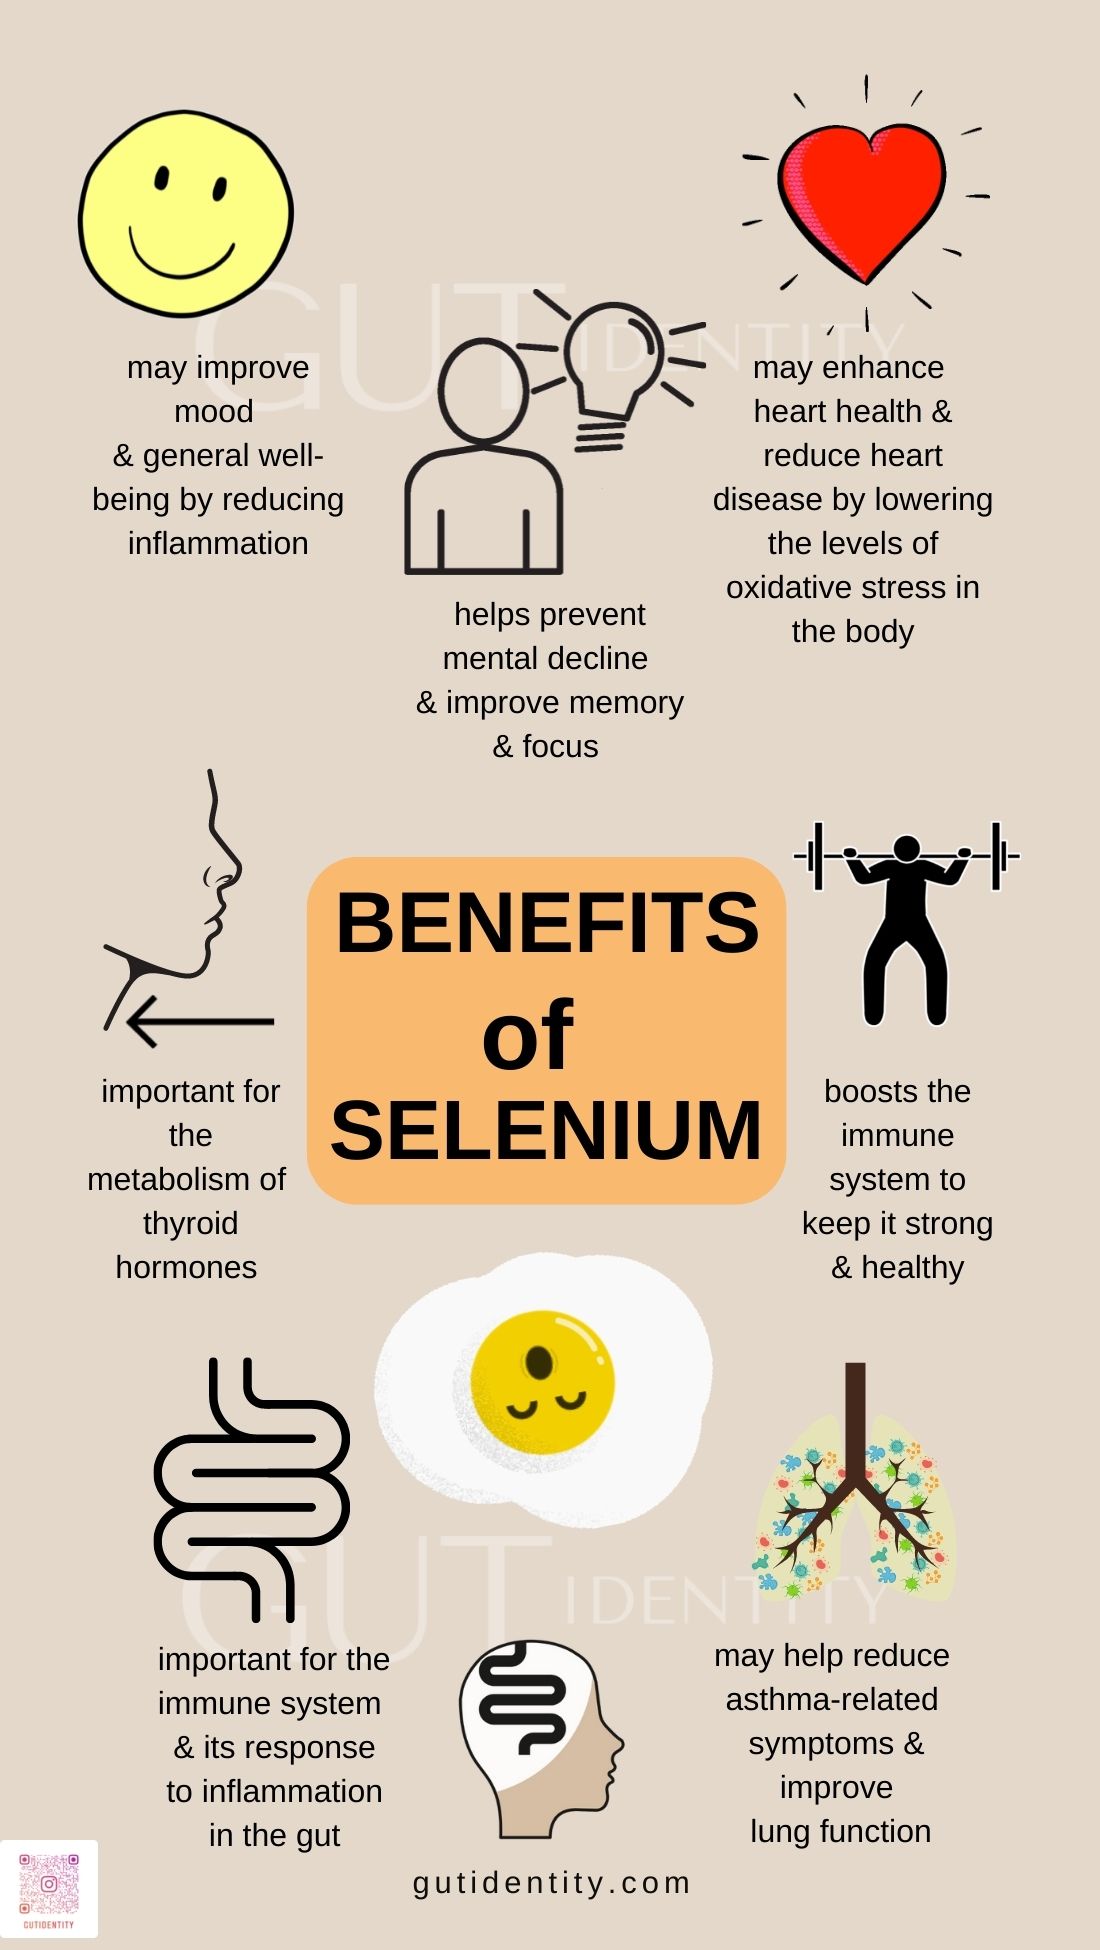 The Benefits of Selenium by Gutidentity